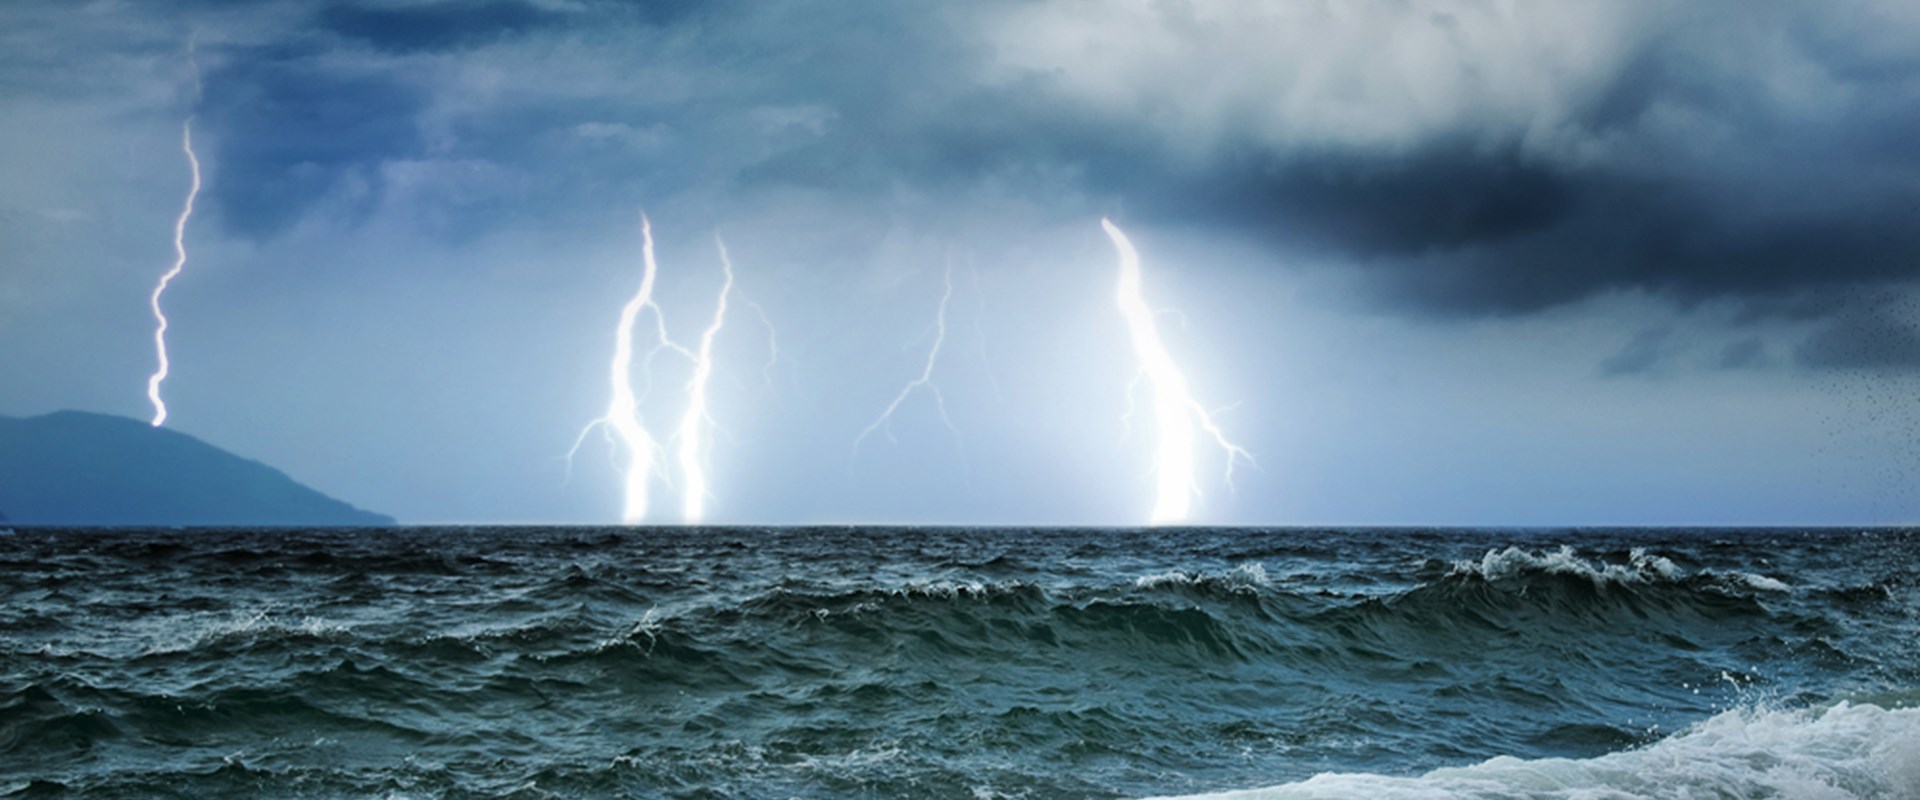 An image of a storm sea with waves and thunder and lighting in the background